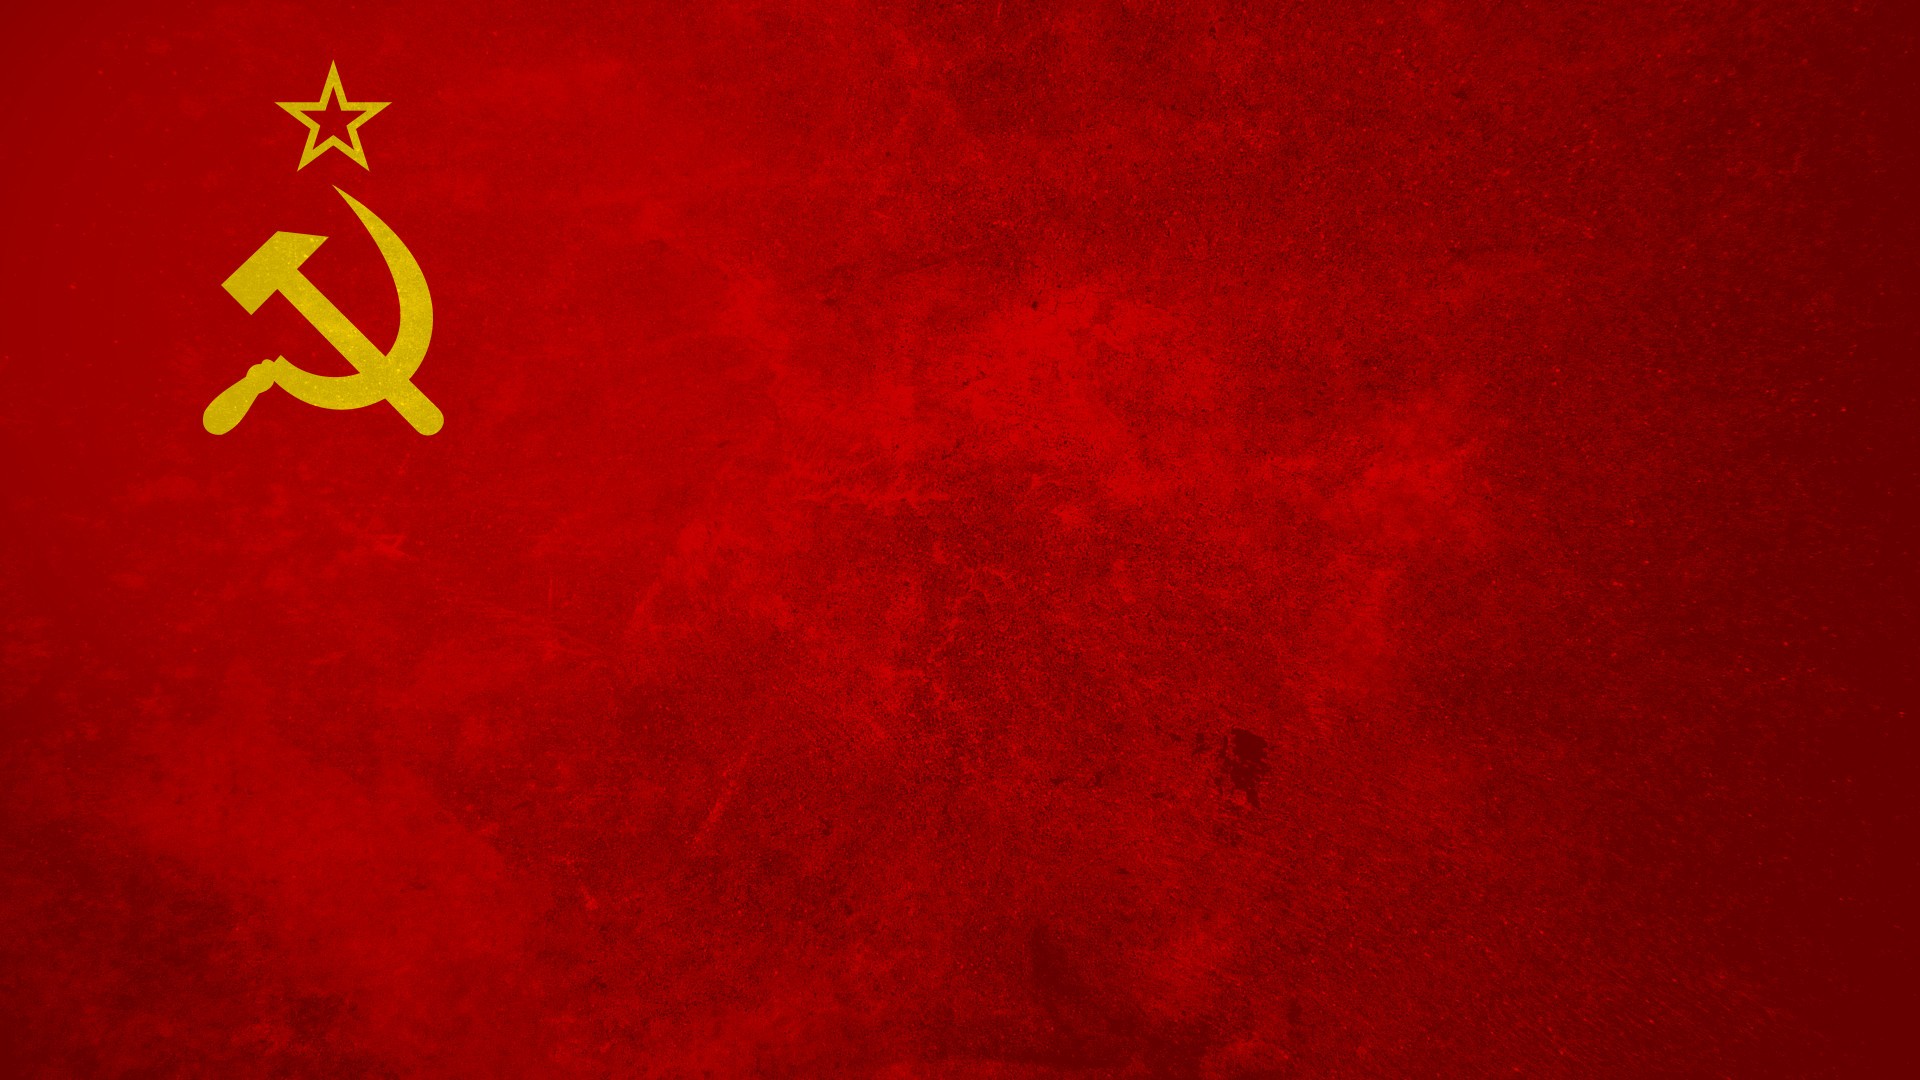 General 1920x1080 flag USSR red background hammer and sickle